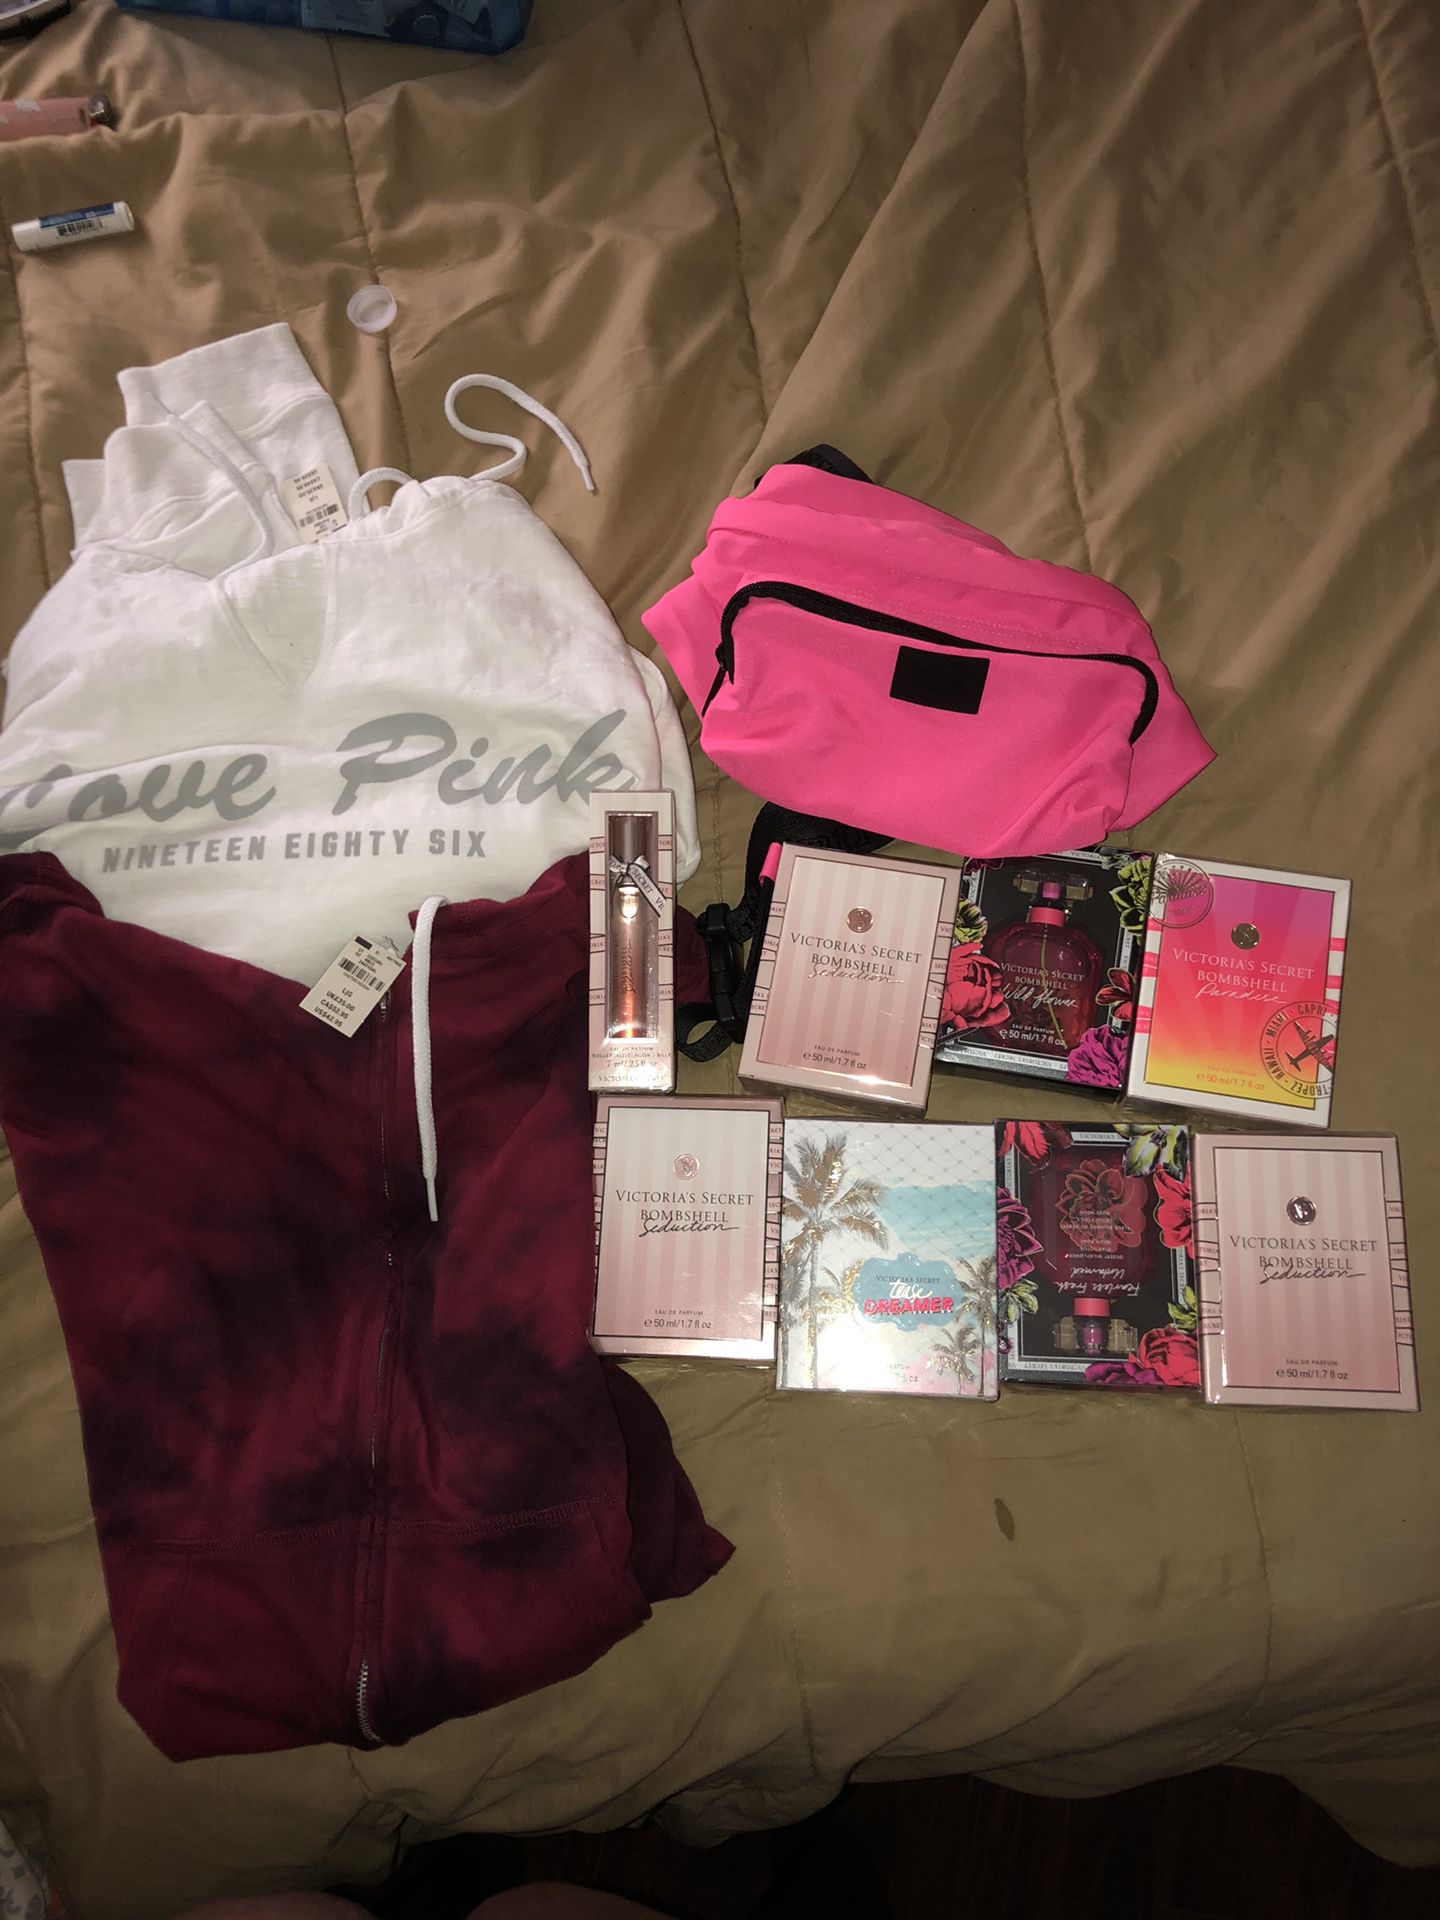 All New..Victoria’s Secret perfume and pink clothing